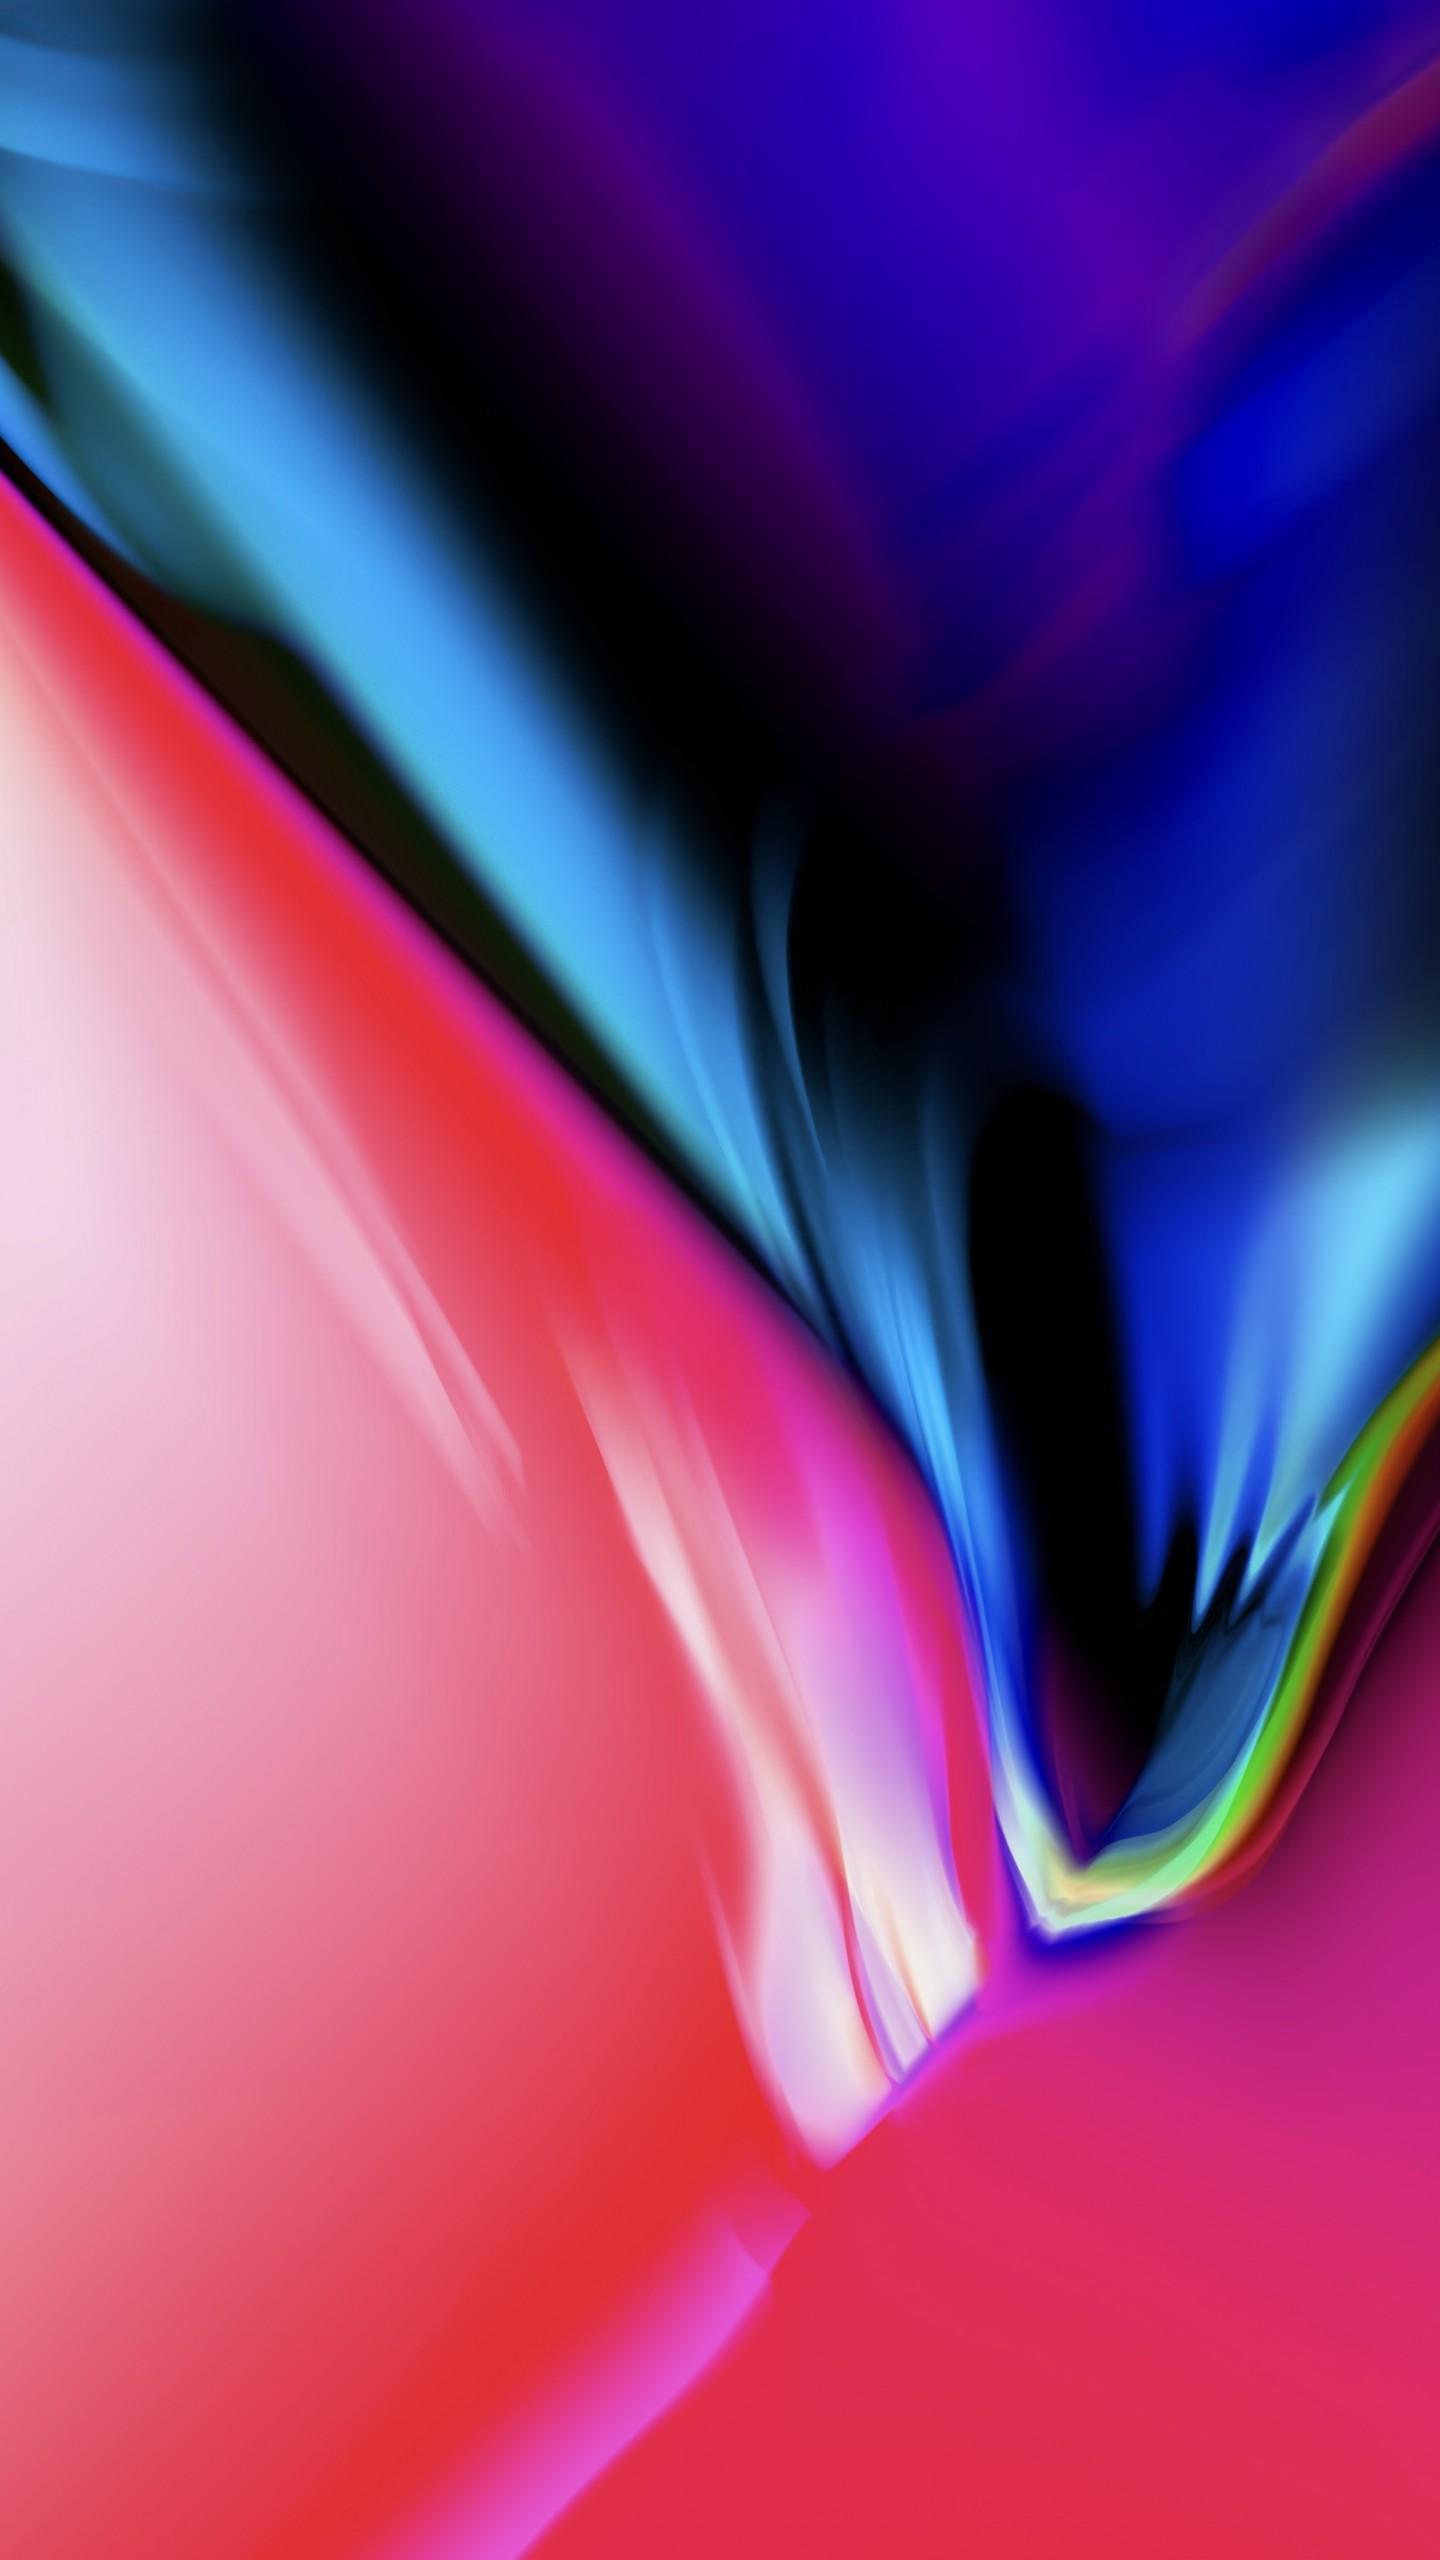 Wallpaper iPhone X wallpaper, iPhone iOS colorful, HD